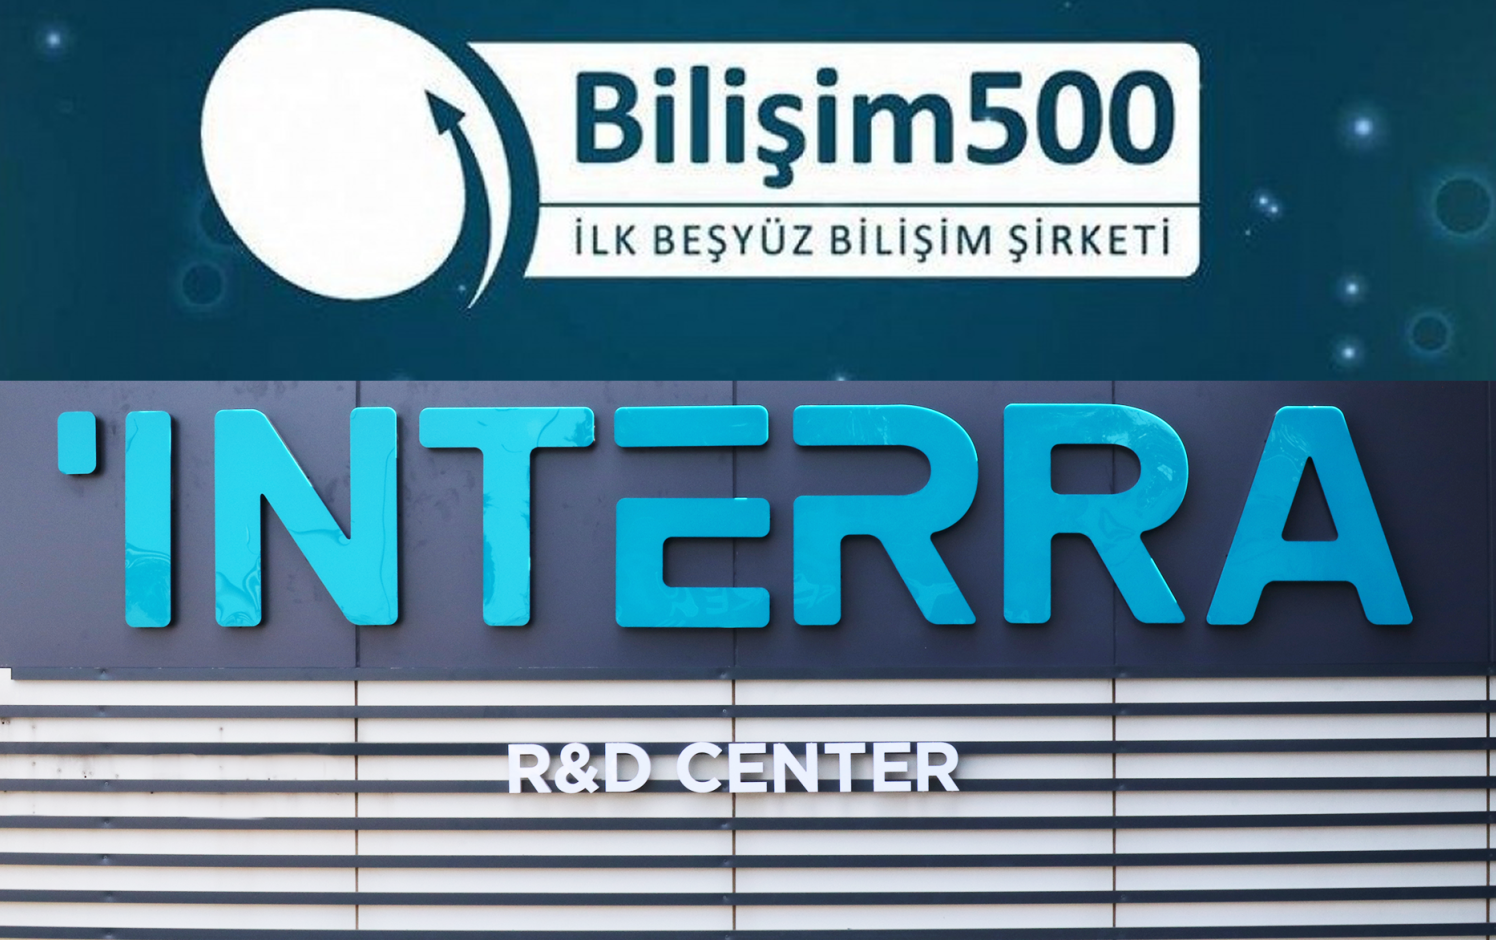 Interra Technology became the 2nd among Turkey-based Manufacturers!